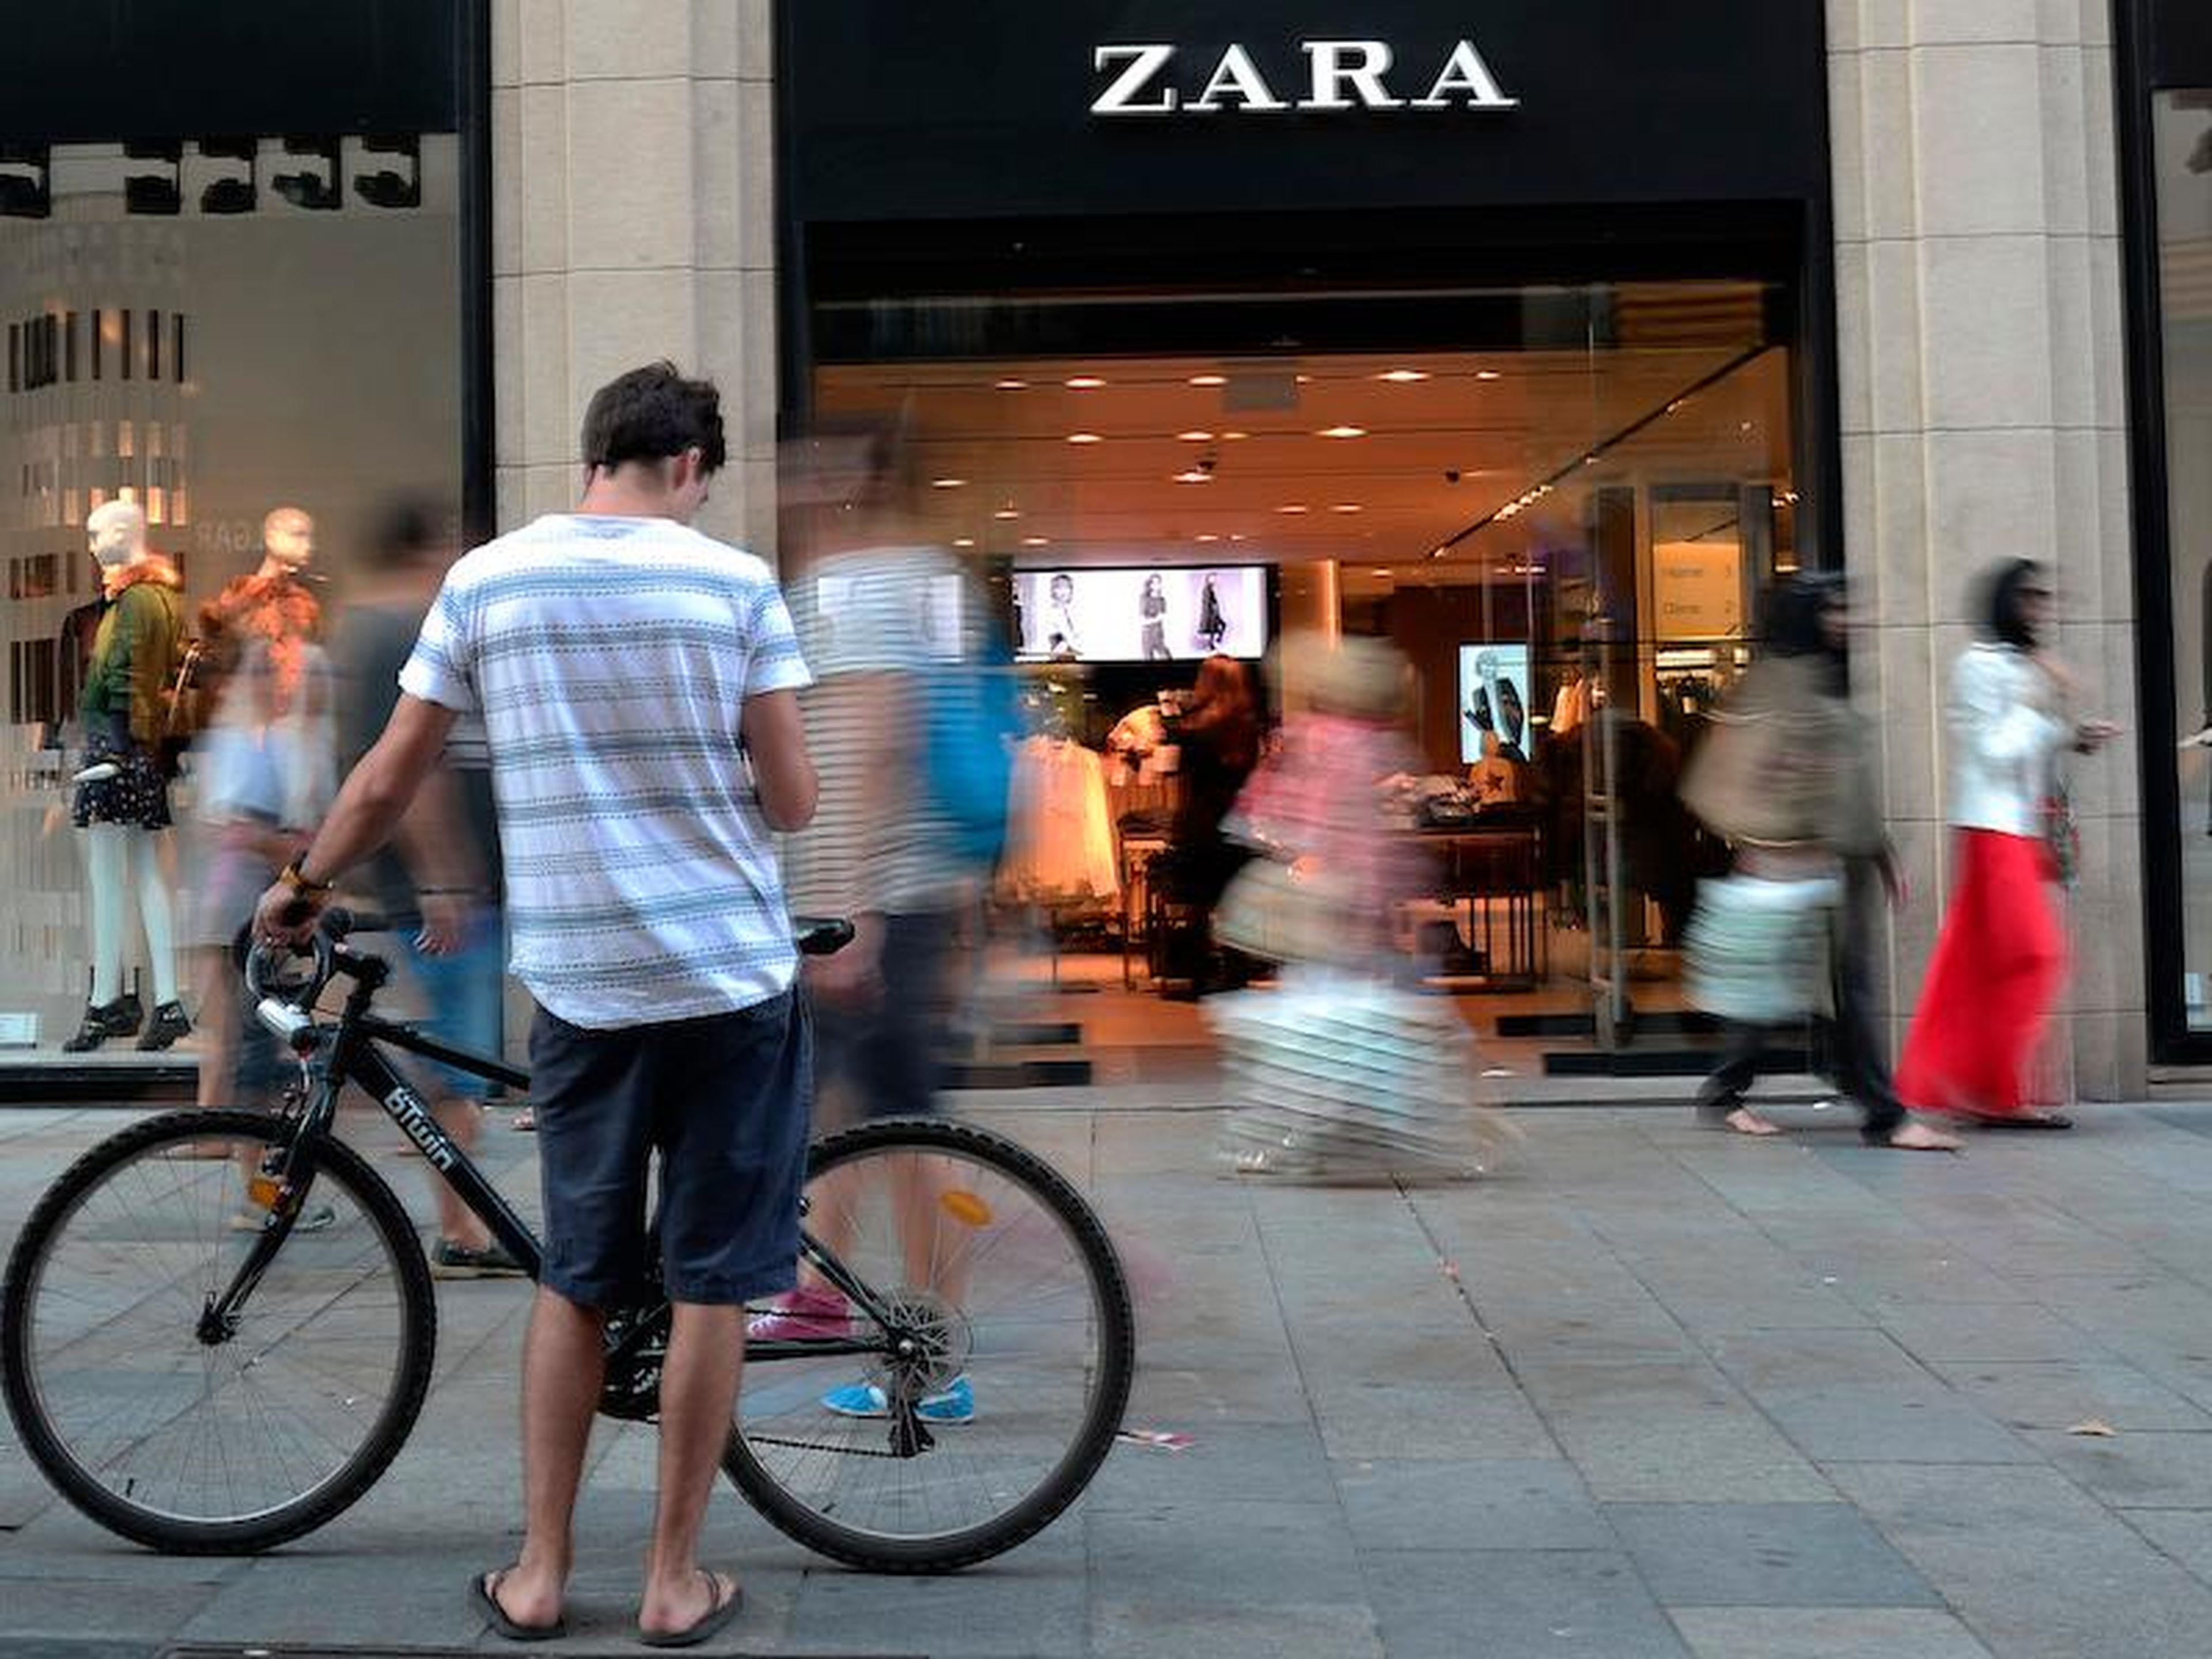 Over the course of two decades, the brand expanded dramatically, opening stores across Spain and in different countries around the world. In 1985, Ortega incorporated the chain into a holding company called Inditex.